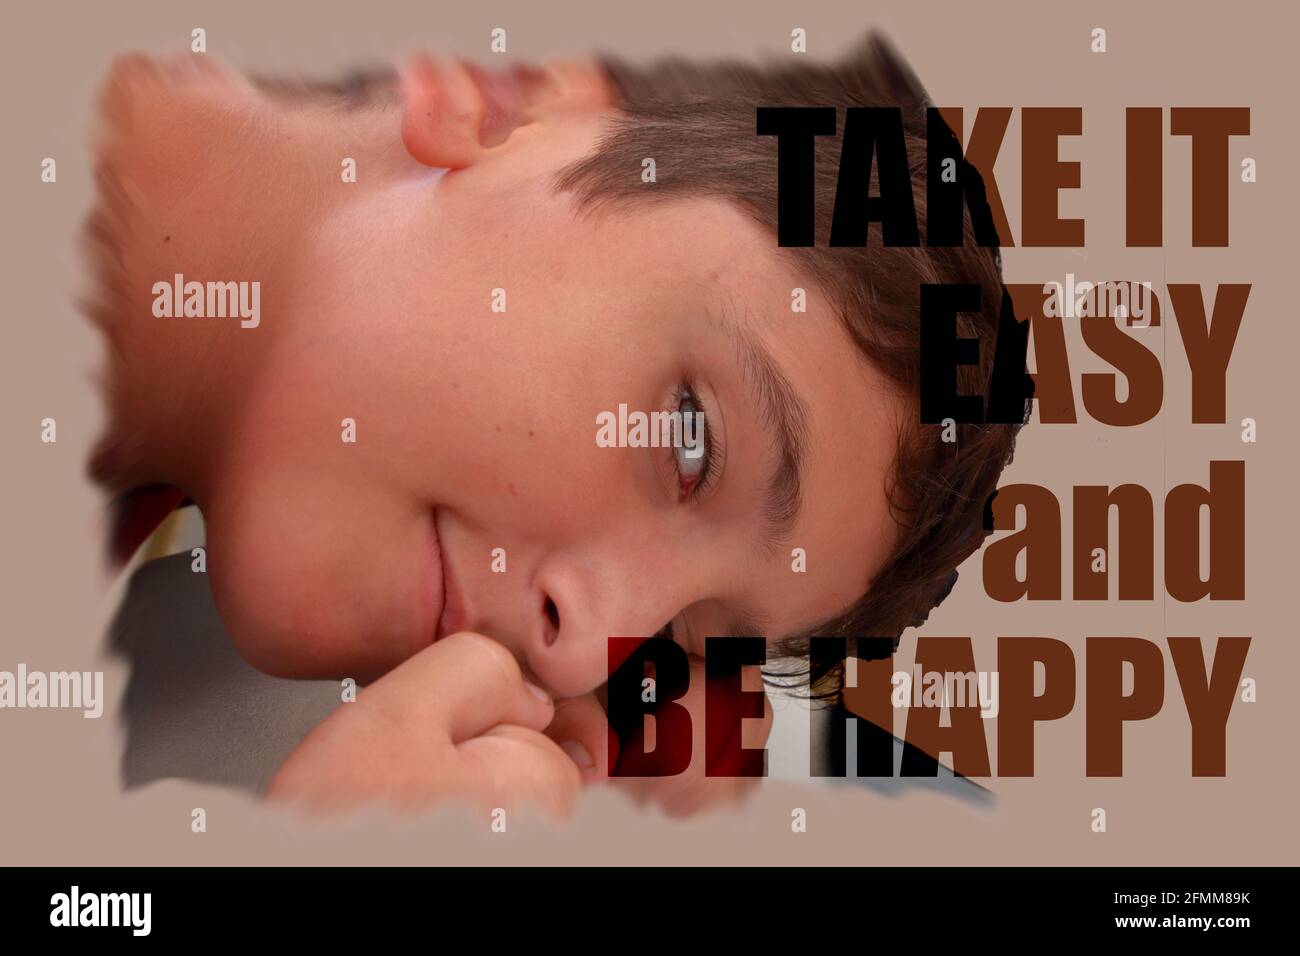 take it easy and be happy Stock Photo